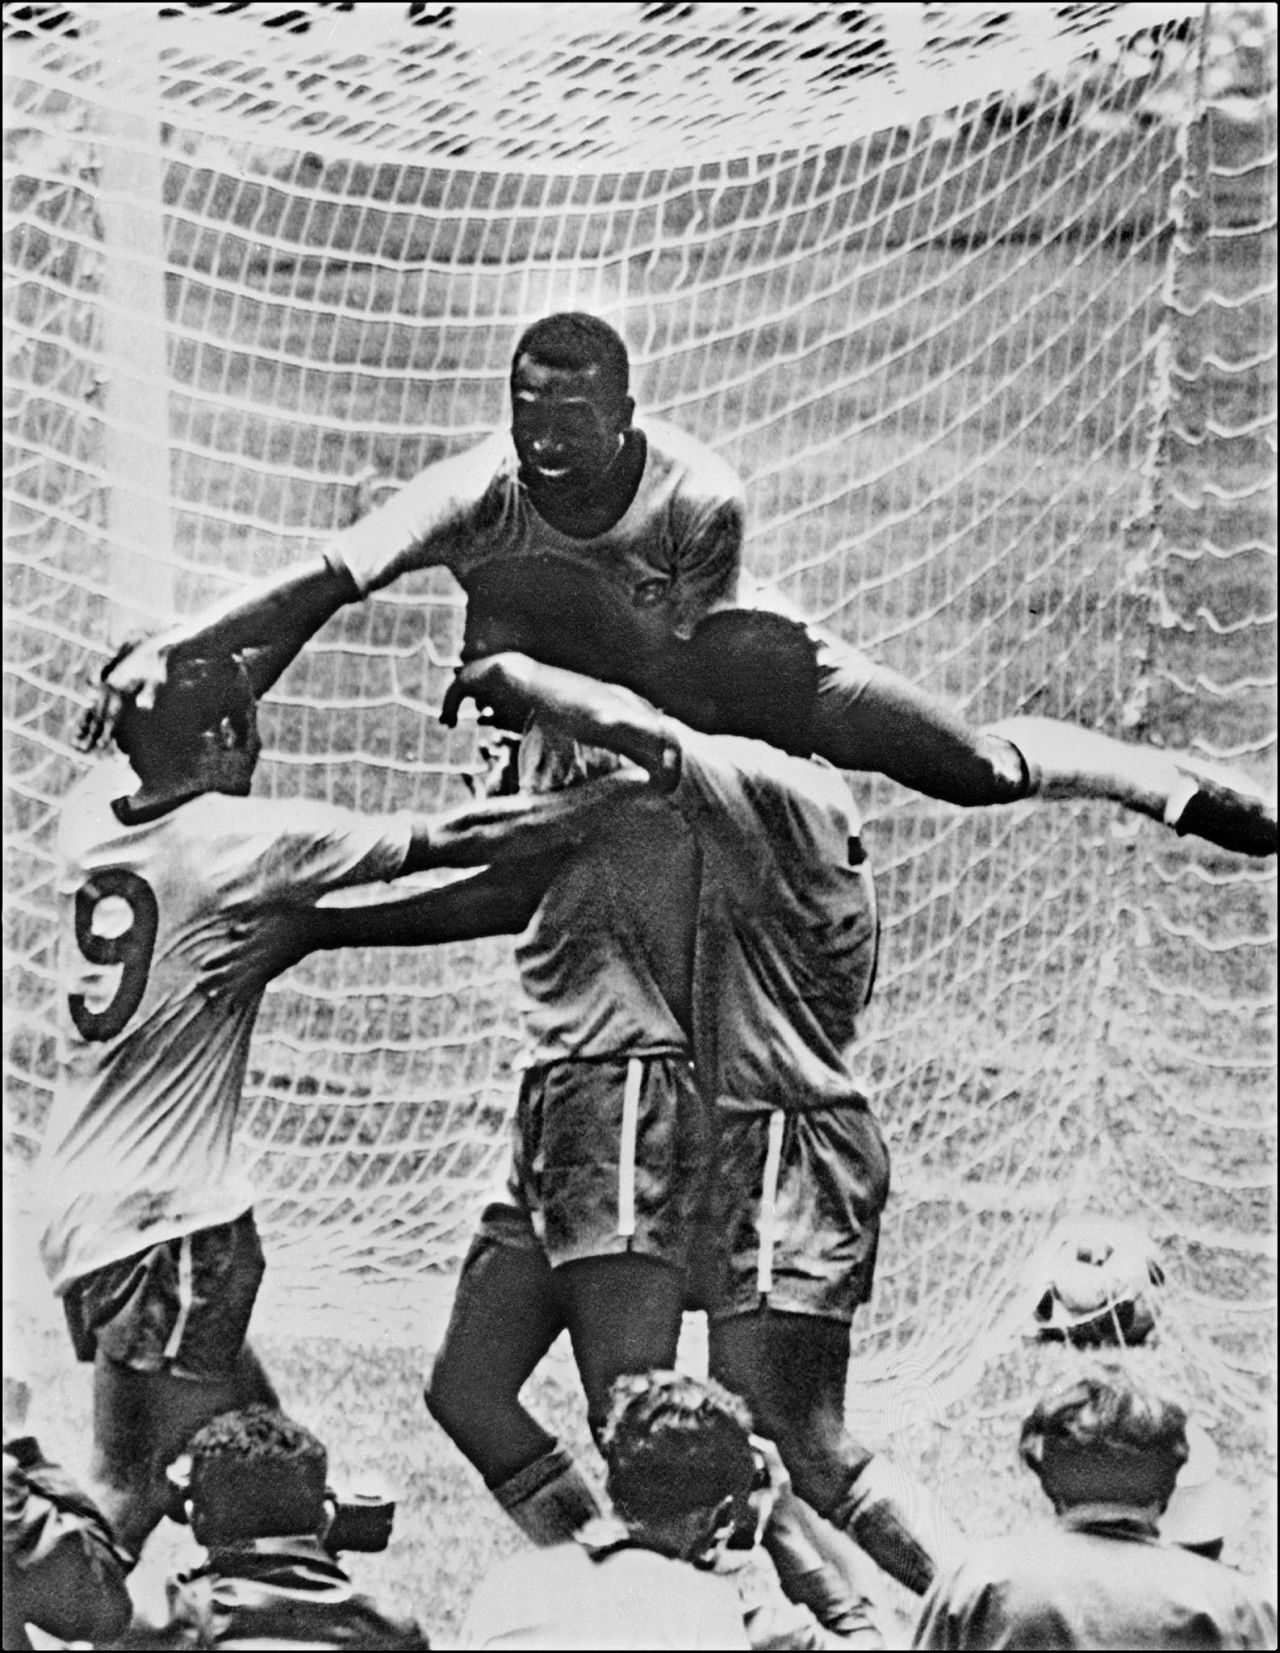 Pele (top) leaps on his teammates during Brazil's 4-1 victory over Italy in the 1970 World Cup final. The Brazil team of that tournament, which clinched a third World Cup triumph, is often heralded as one of the finest in football history.